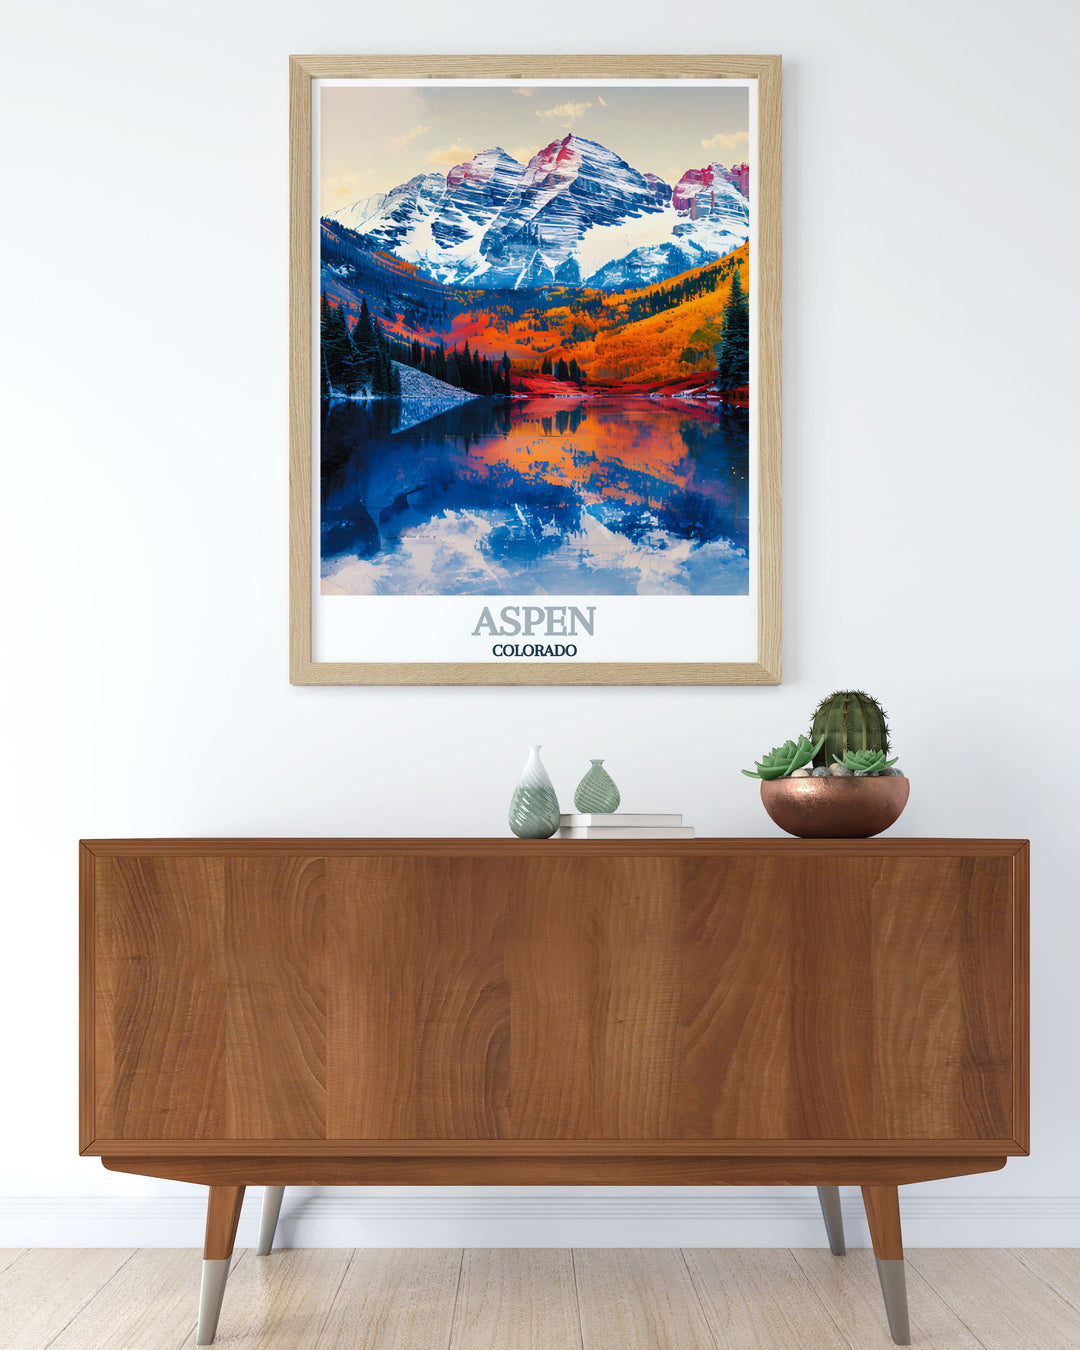 Featuring the iconic Maroon Bells, this travel poster brings the serene beauty of Colorados Rocky Mountains into your home, making it an ideal piece for mountain and nature lovers.